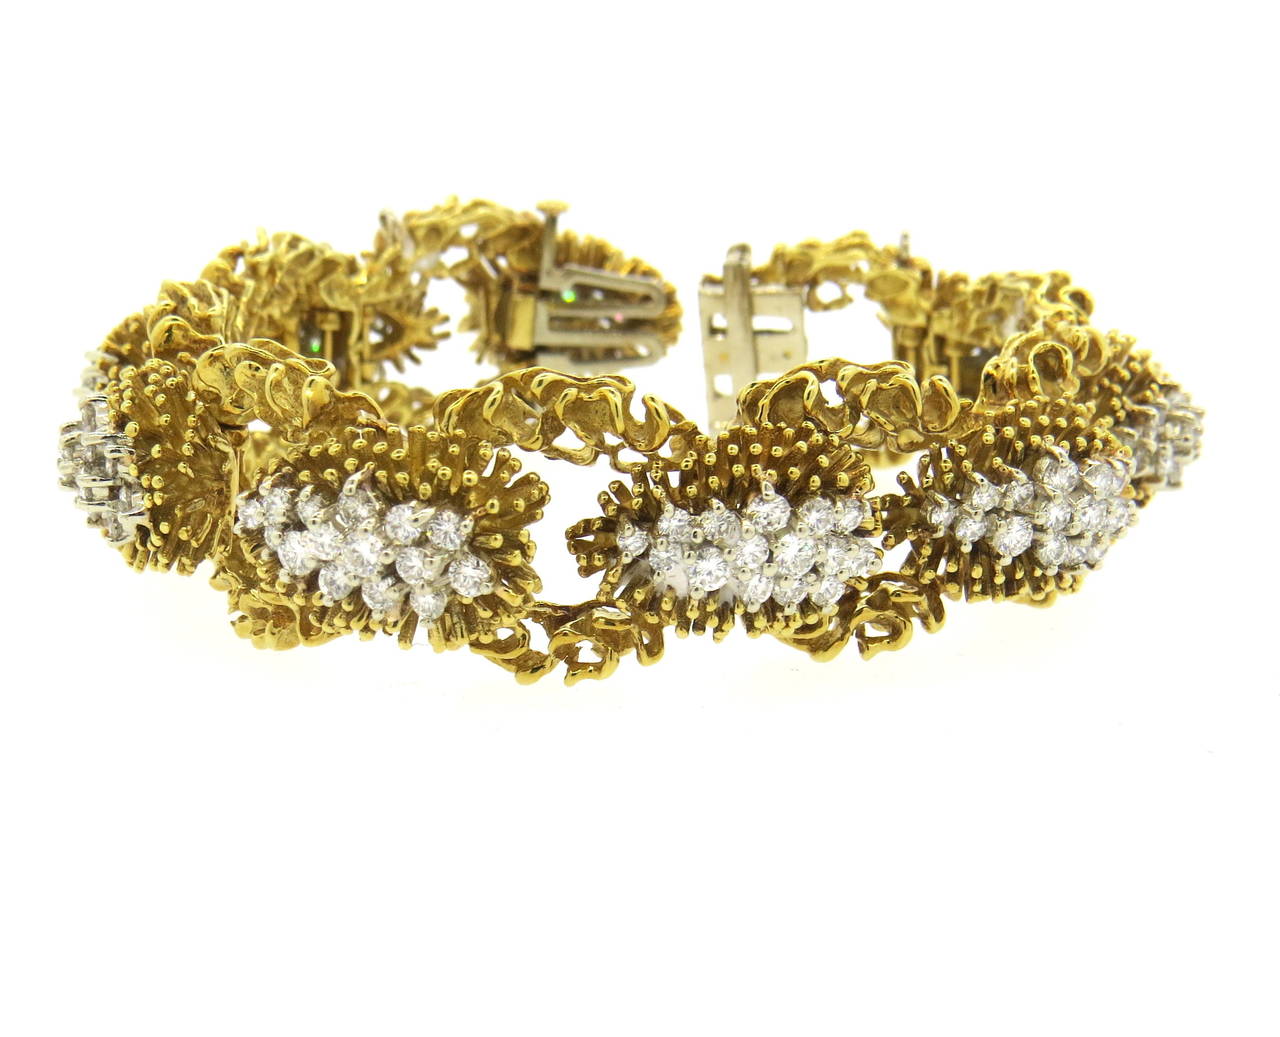 Circa 1960s 18k yellow gold bracelet, decorated with approximately 5.00 - 5.50ctw in G/VS diamonds. Bracelet is 6 1/2